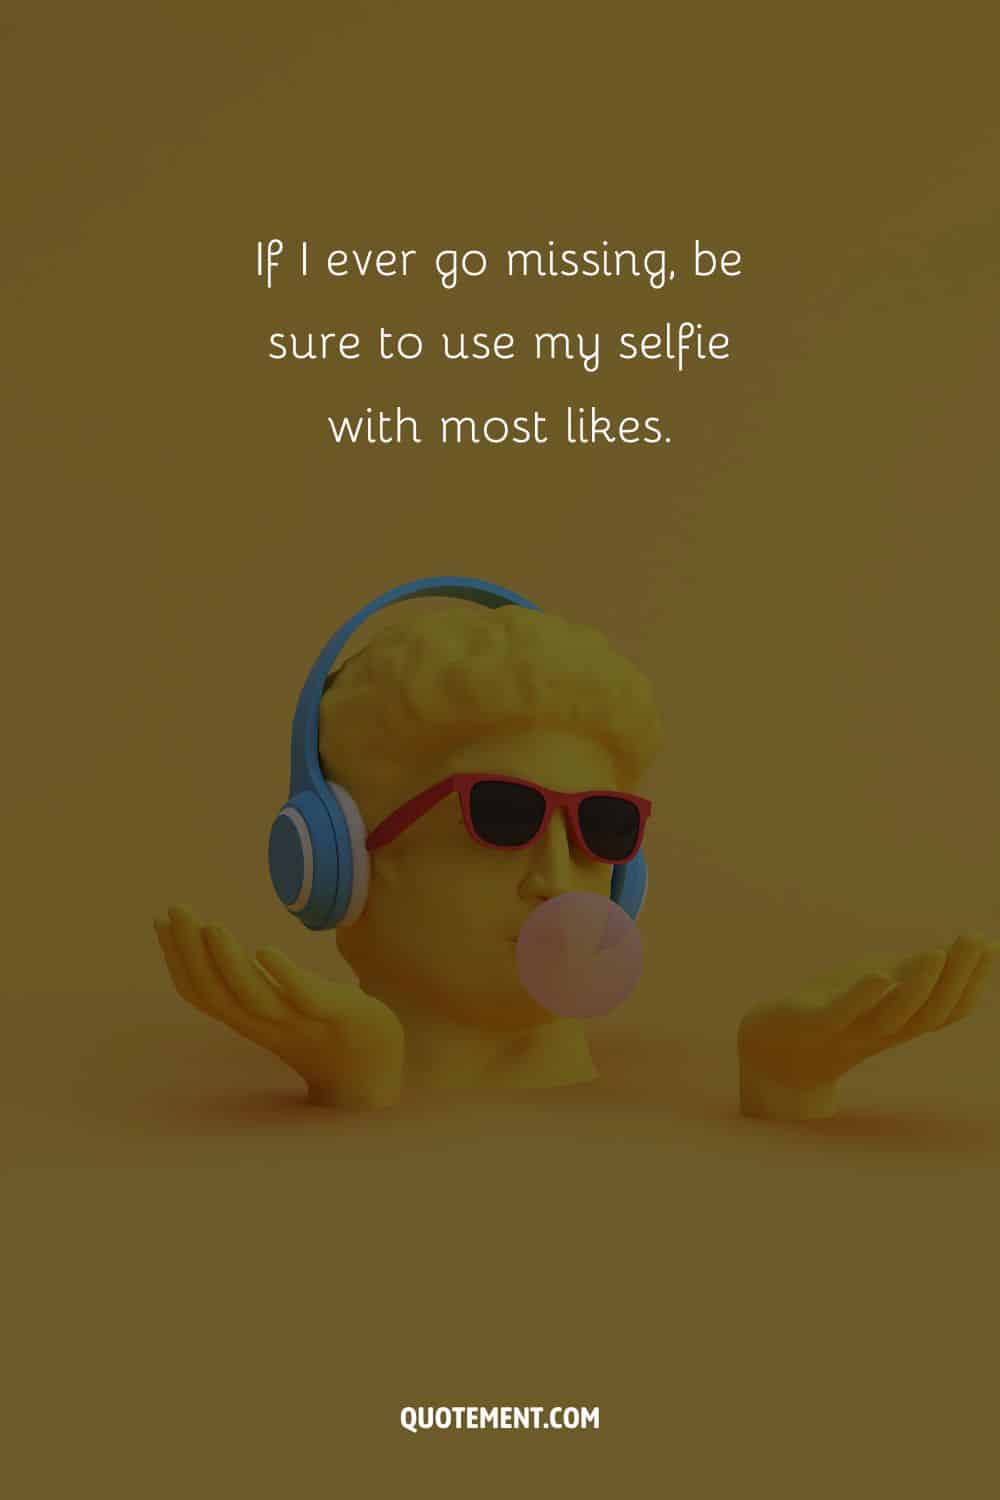 Short and funny caption for Ig represented by an illustration of a man wearing sunglasses and headphones
